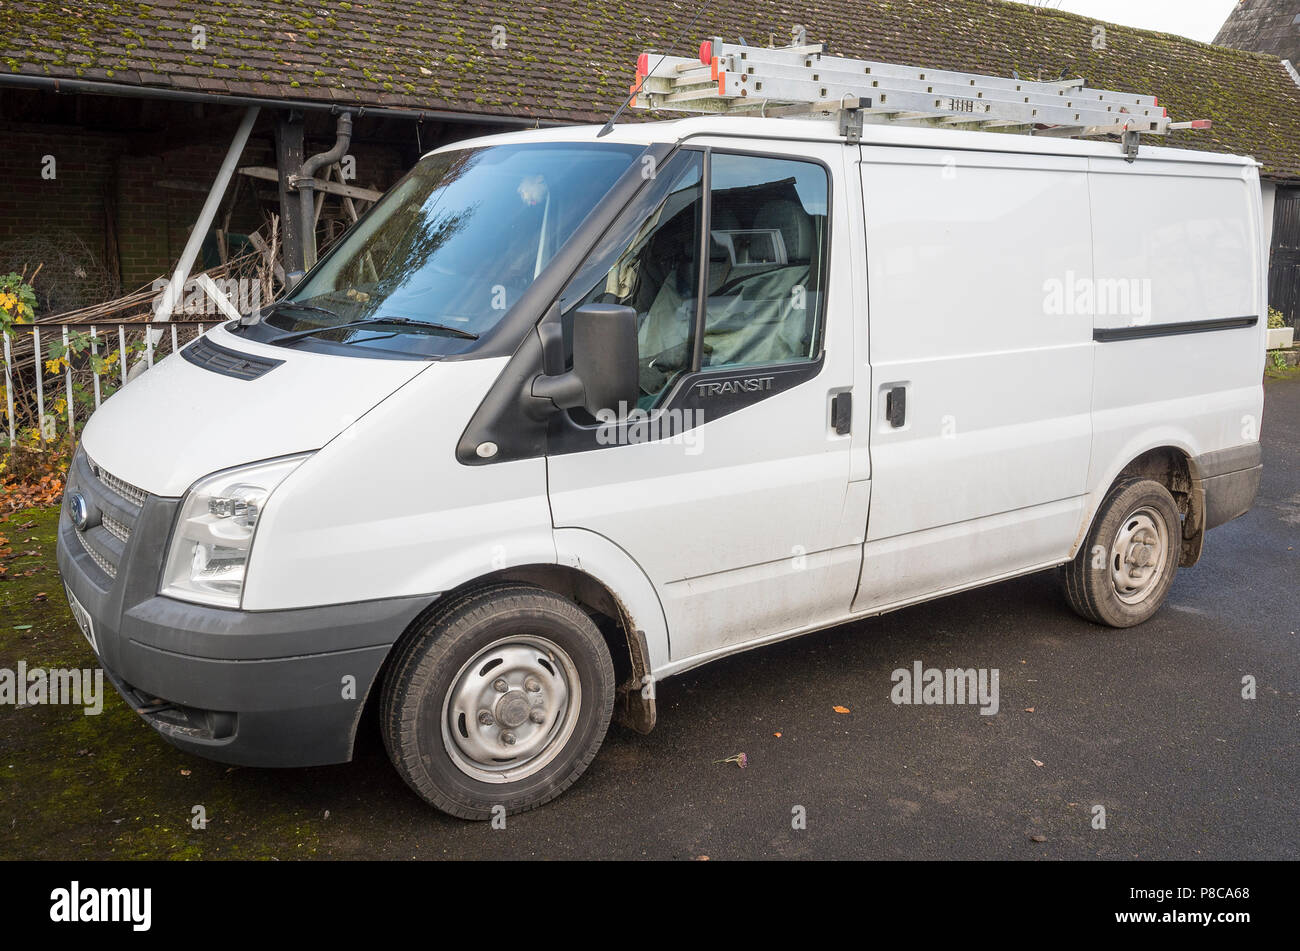 White Ford Transit Van High Resolution Stock Photography and Images - Alamy